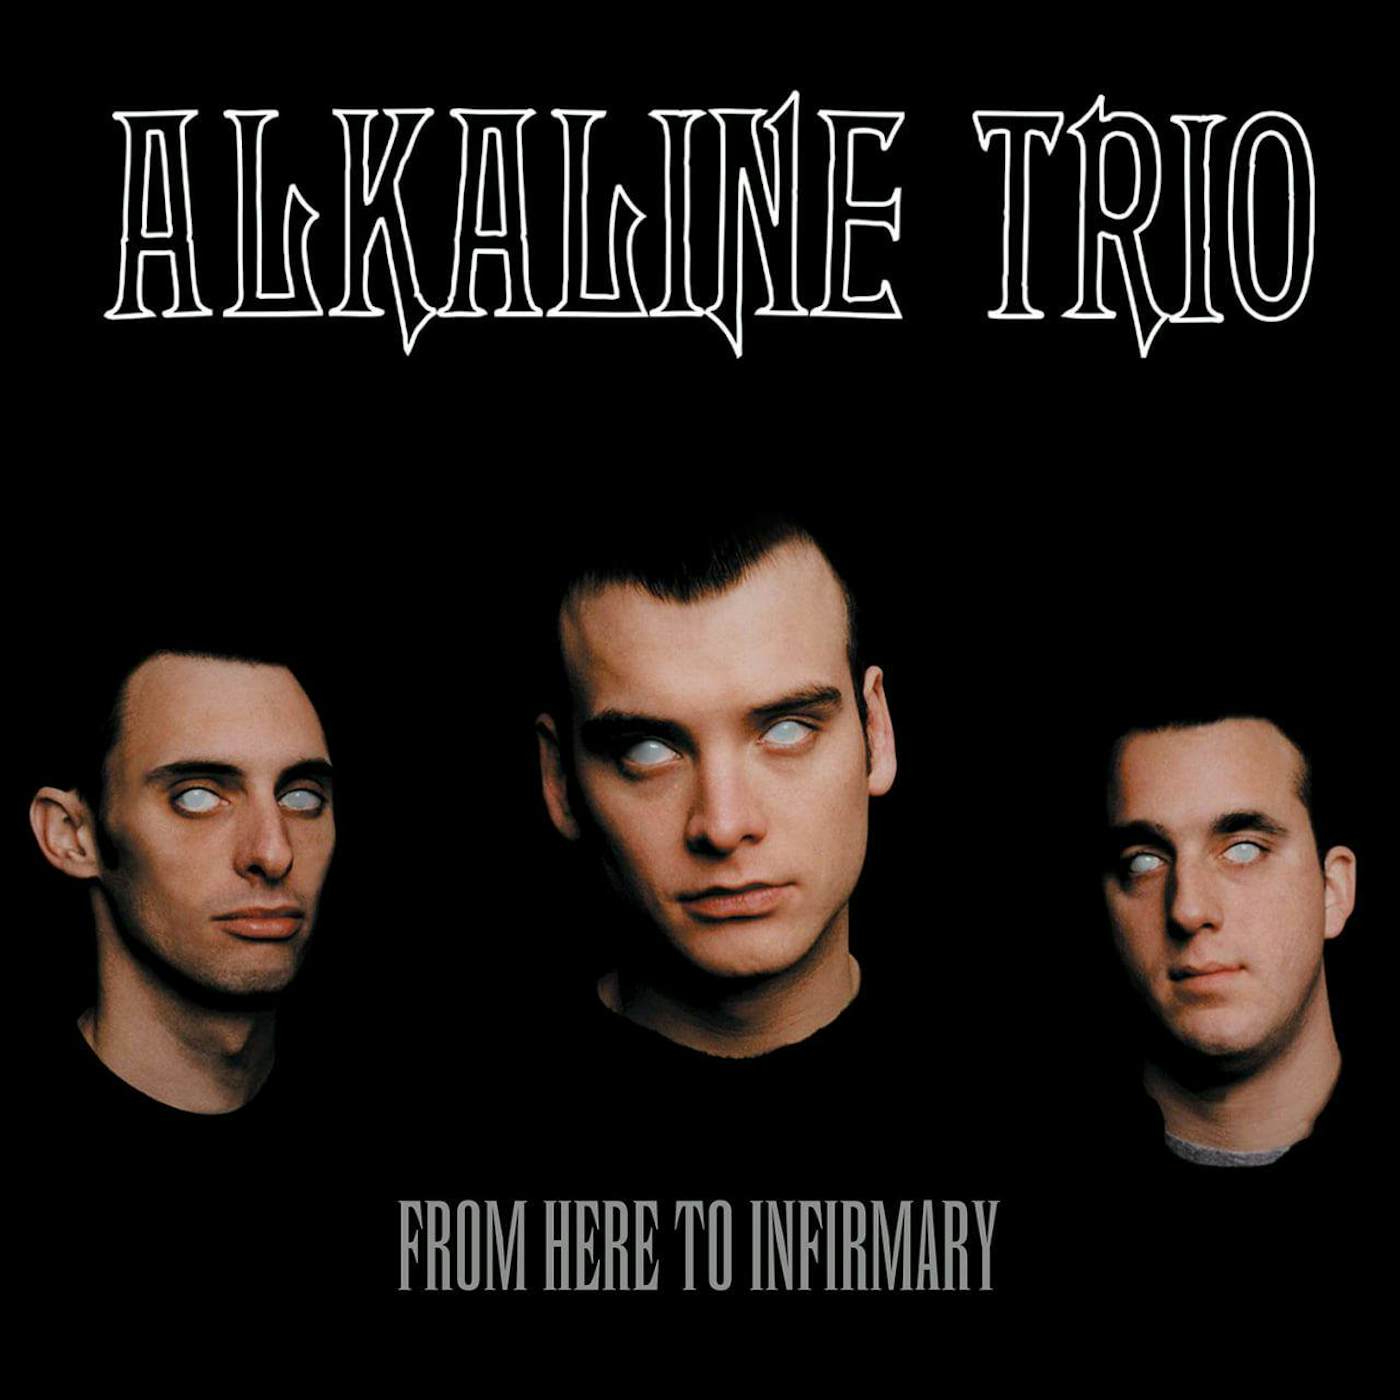 Alkaline Trio FROM HERE TO INFIRMARY Vinyl Record